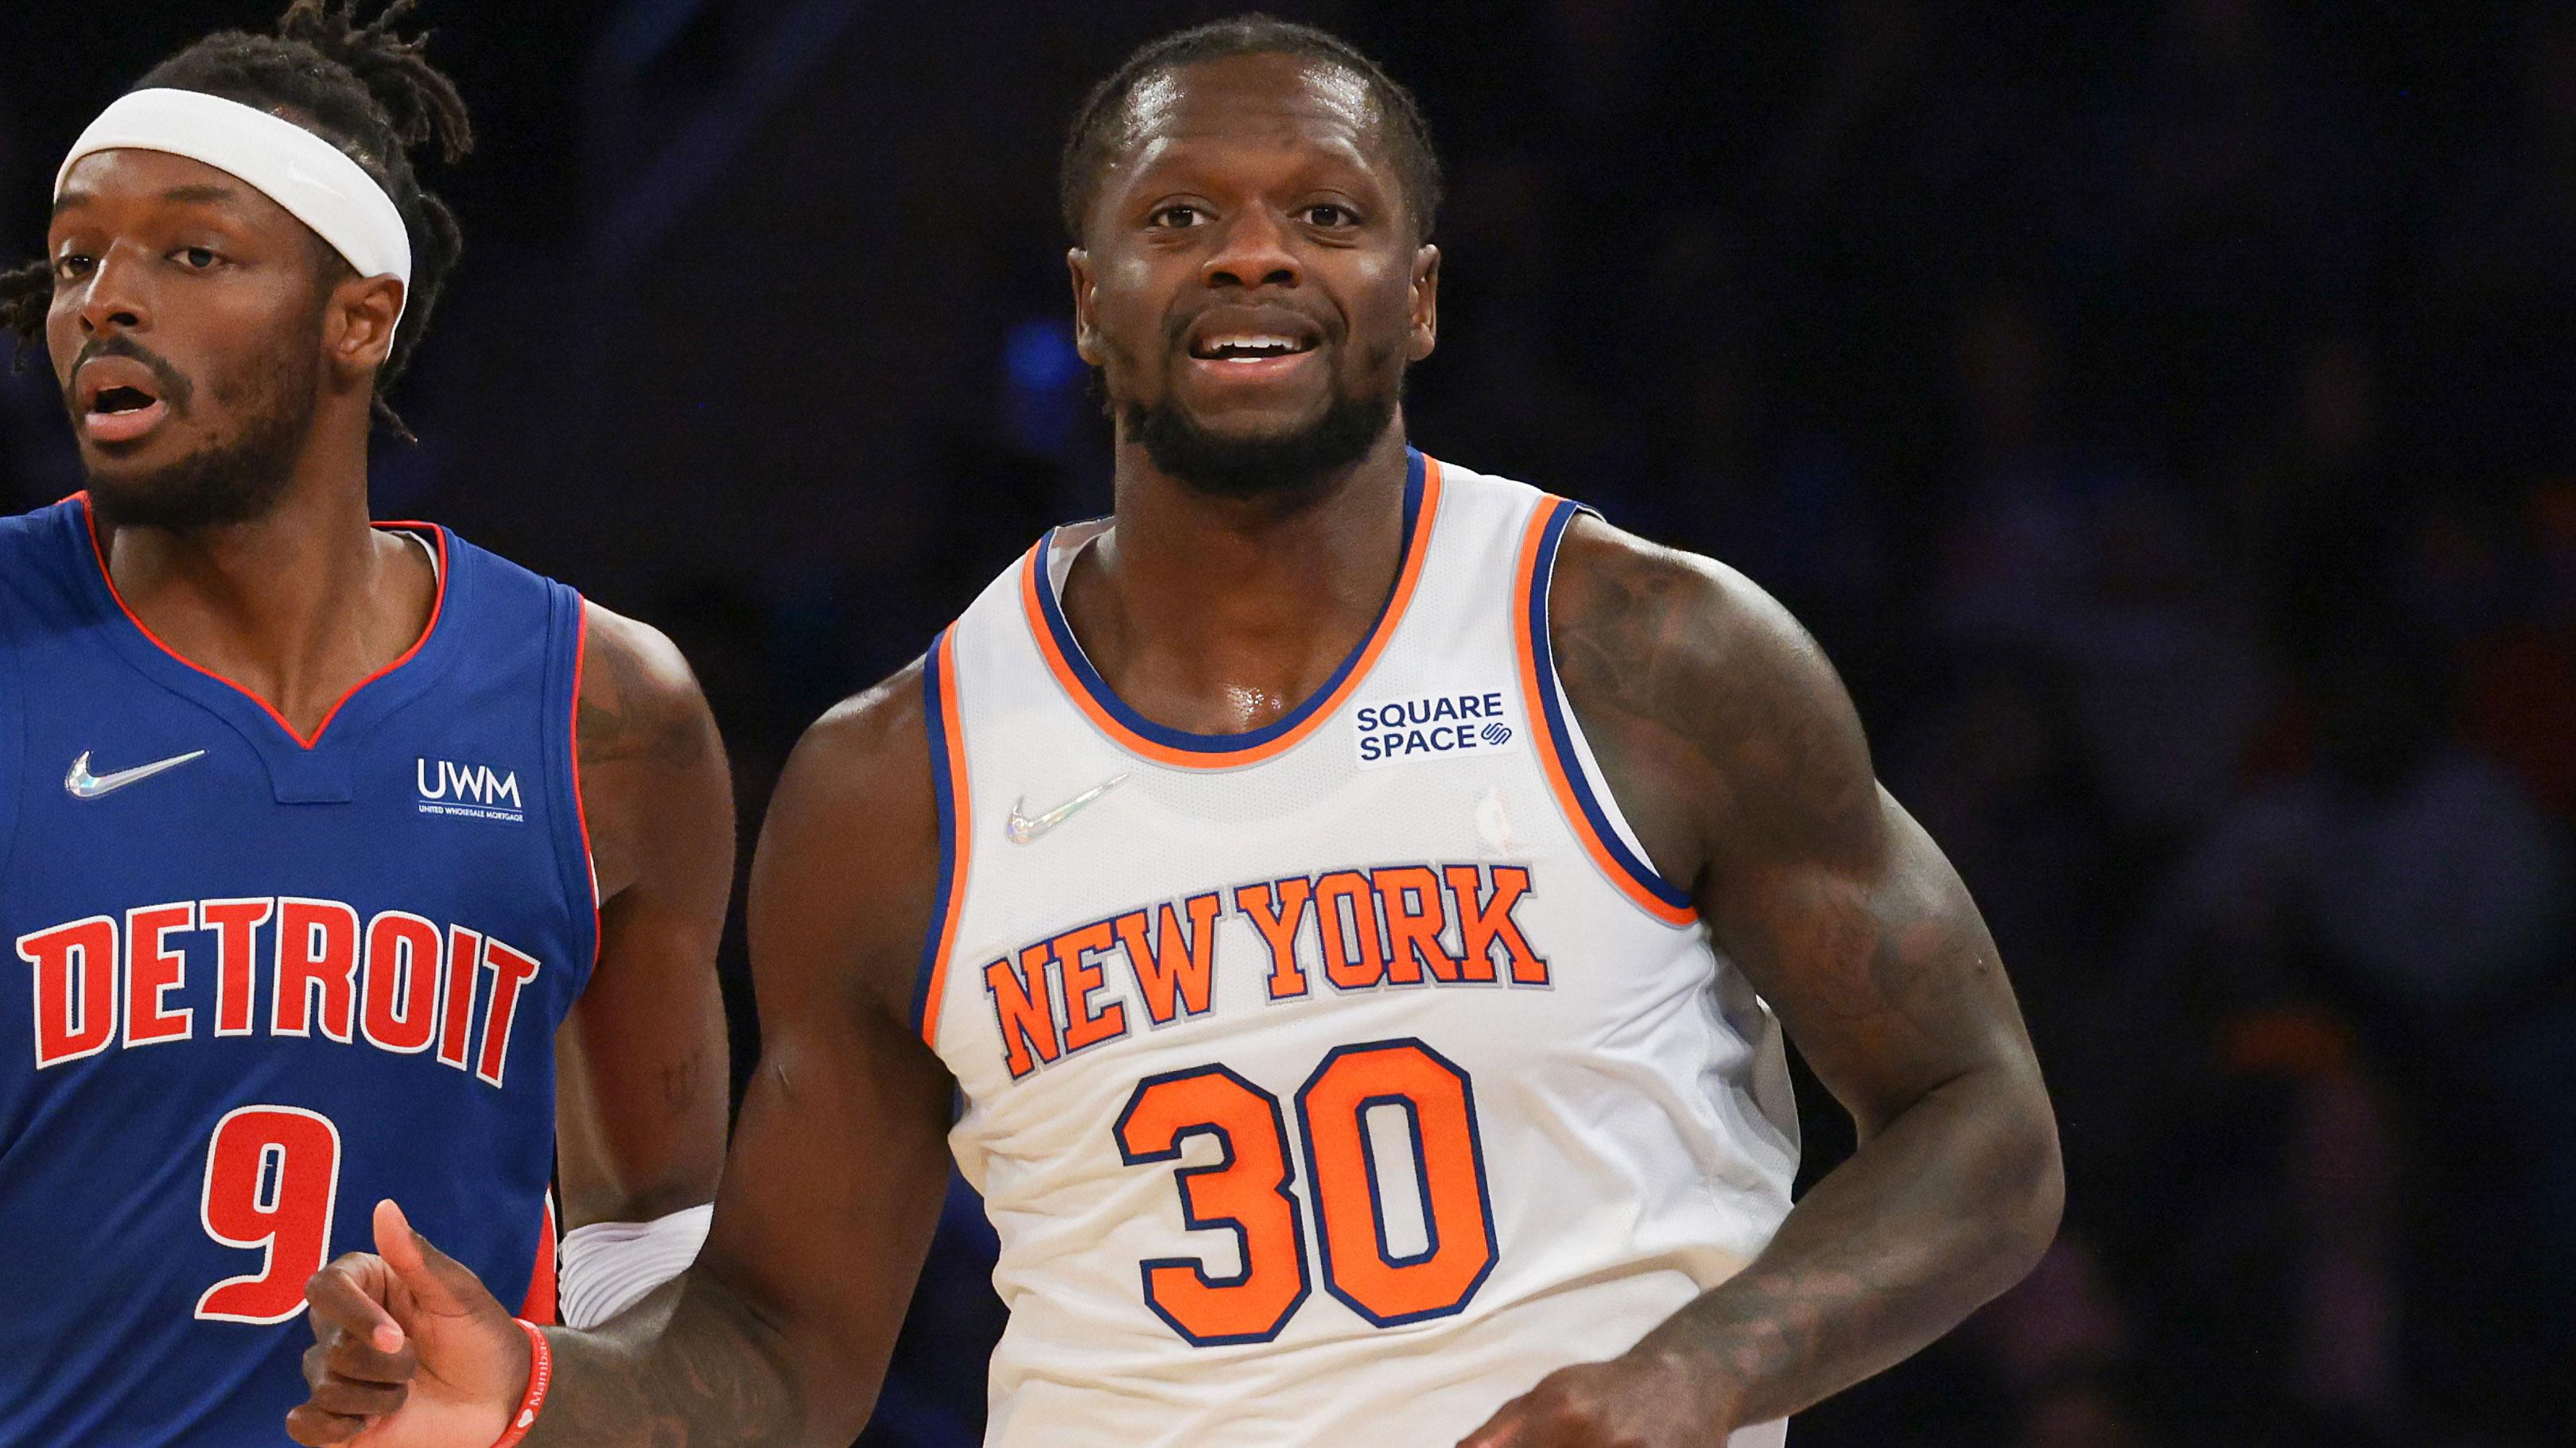 Oct 13, 2021; New York, New York, USA; New York Knicks forward Julius Randle (30) runs up court after scoring a basket alongside Detroit Pistons forward Jerami Grant (9) during the first half at Madison Square Garden. / Vincent Carchietta-USA TODAY Sports